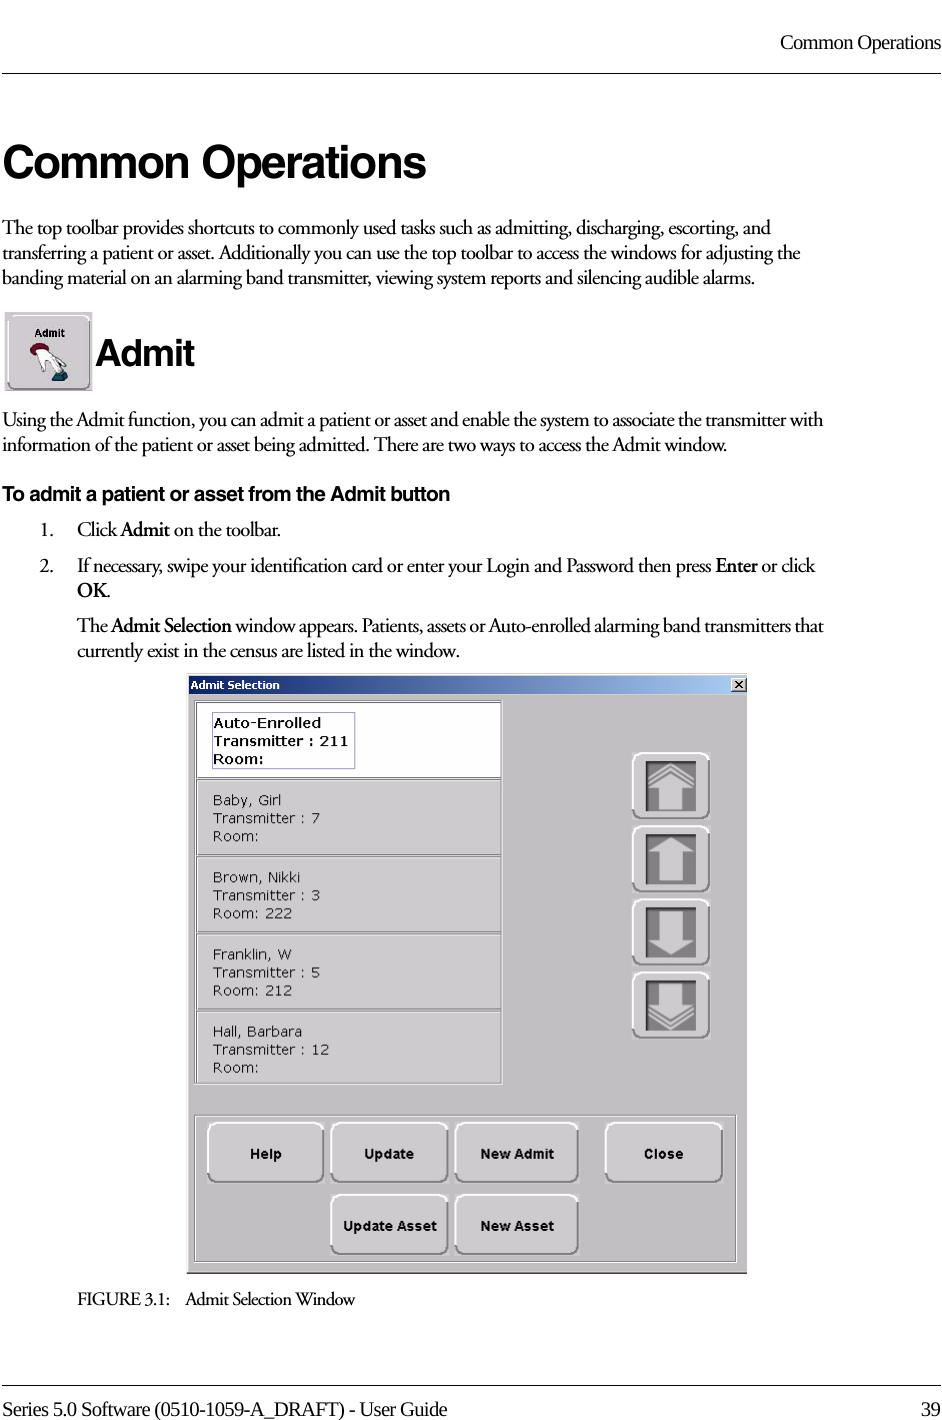 Series 5.0 Software (0510-1059-A_DRAFT) - User Guide  39Common OperationsCommon OperationsThe top toolbar provides shortcuts to commonly used tasks such as admitting, discharging, escorting, and transferring a patient or asset. Additionally you can use the top toolbar to access the windows for adjusting the banding material on an alarming band transmitter, viewing system reports and silencing audible alarms.Admit Using the Admit function, you can admit a patient or asset and enable the system to associate the transmitter with information of the patient or asset being admitted. There are two ways to access the Admit window.To admit a patient or asset from the Admit button1.    Click Admit on the toolbar. 2.    If necessary, swipe your identification card or enter your Login and Password then press Enter or click OK.The Admit Selection window appears. Patients, assets or Auto-enrolled alarming band transmitters that currently exist in the census are listed in the window.FIGURE 3.1:    Admit Selection Window